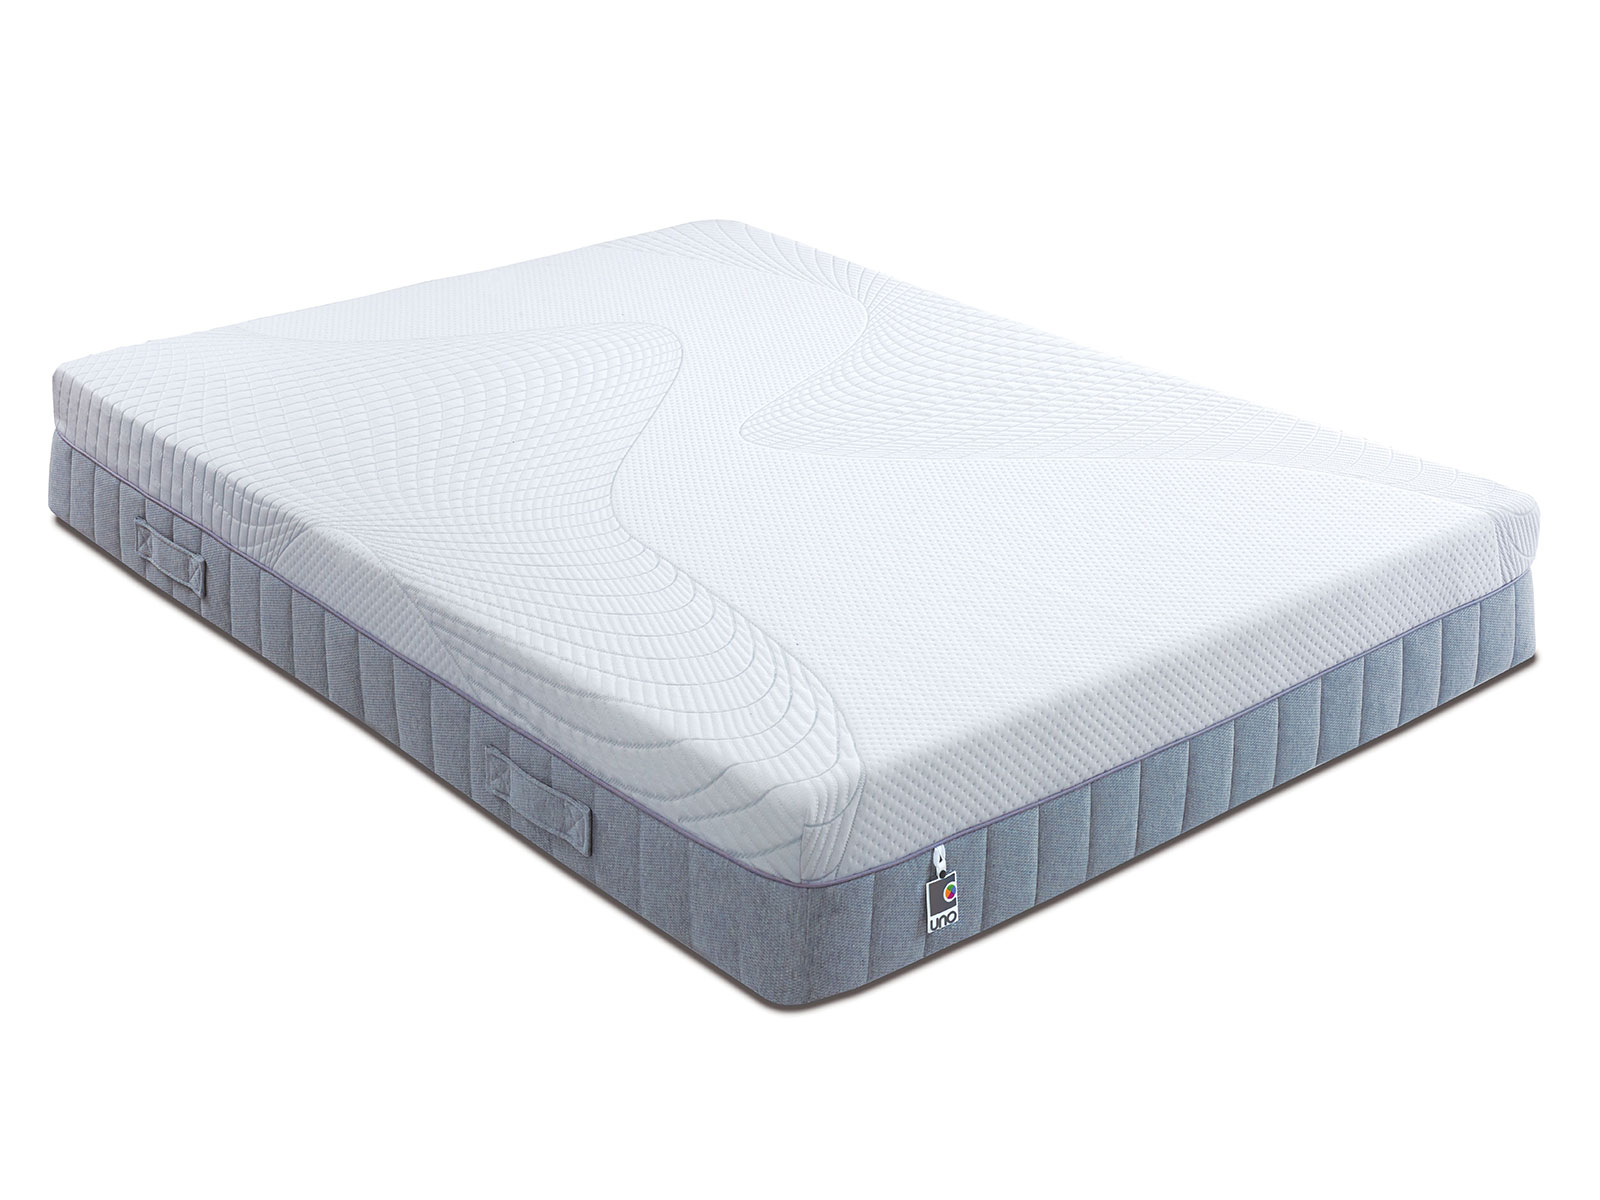 5ft King Size Breasley Uno Comfort Memory Pocket Firm Mattress